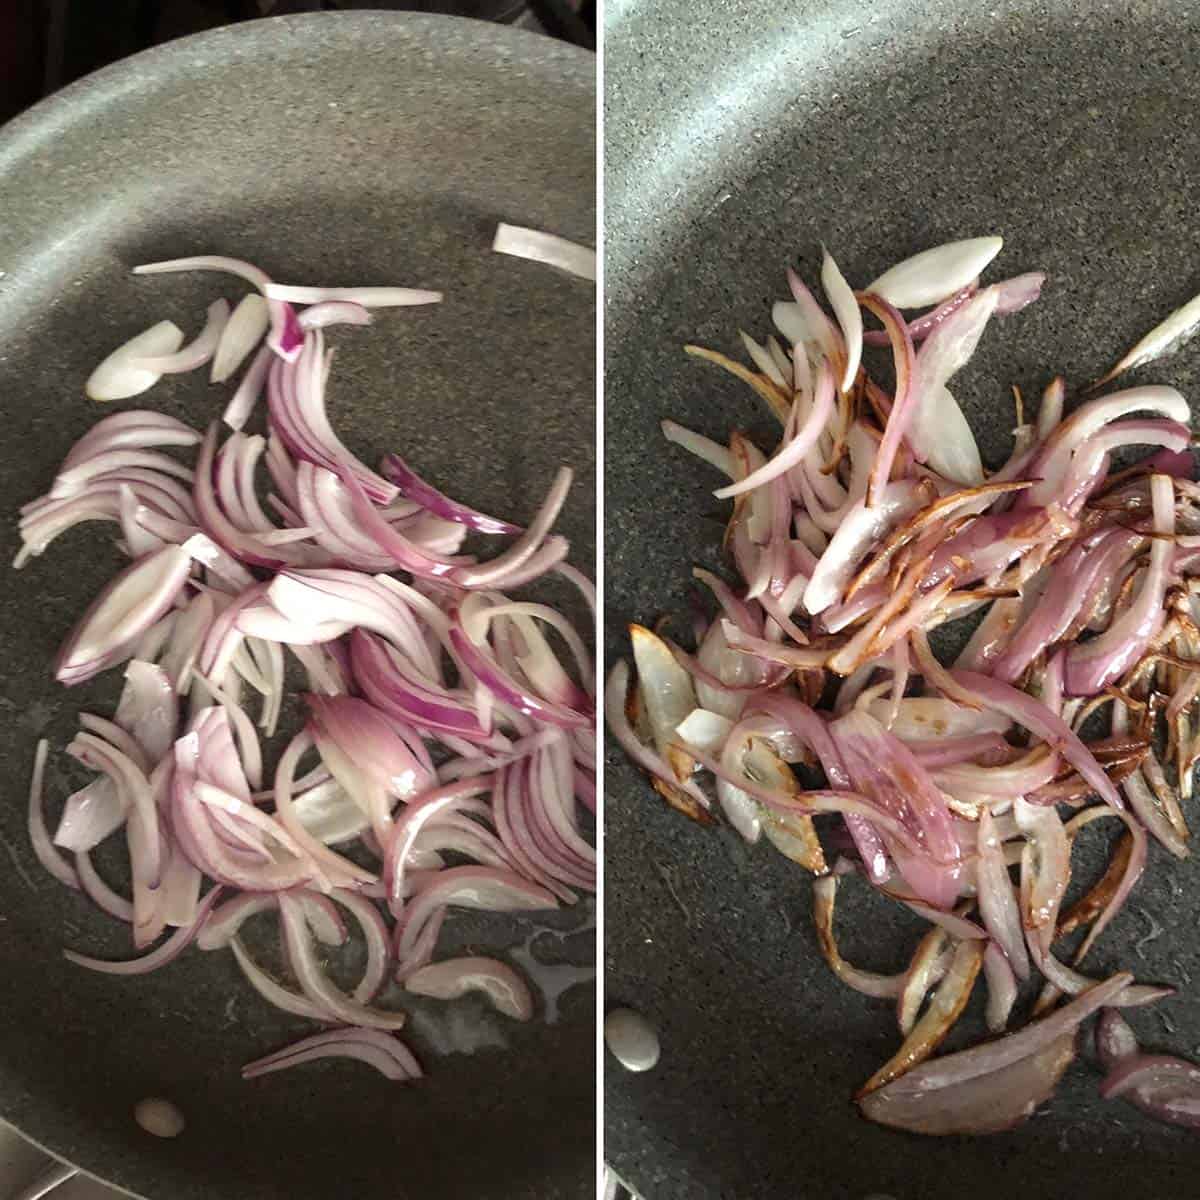 2 panel photo showing the cooking of red onions.